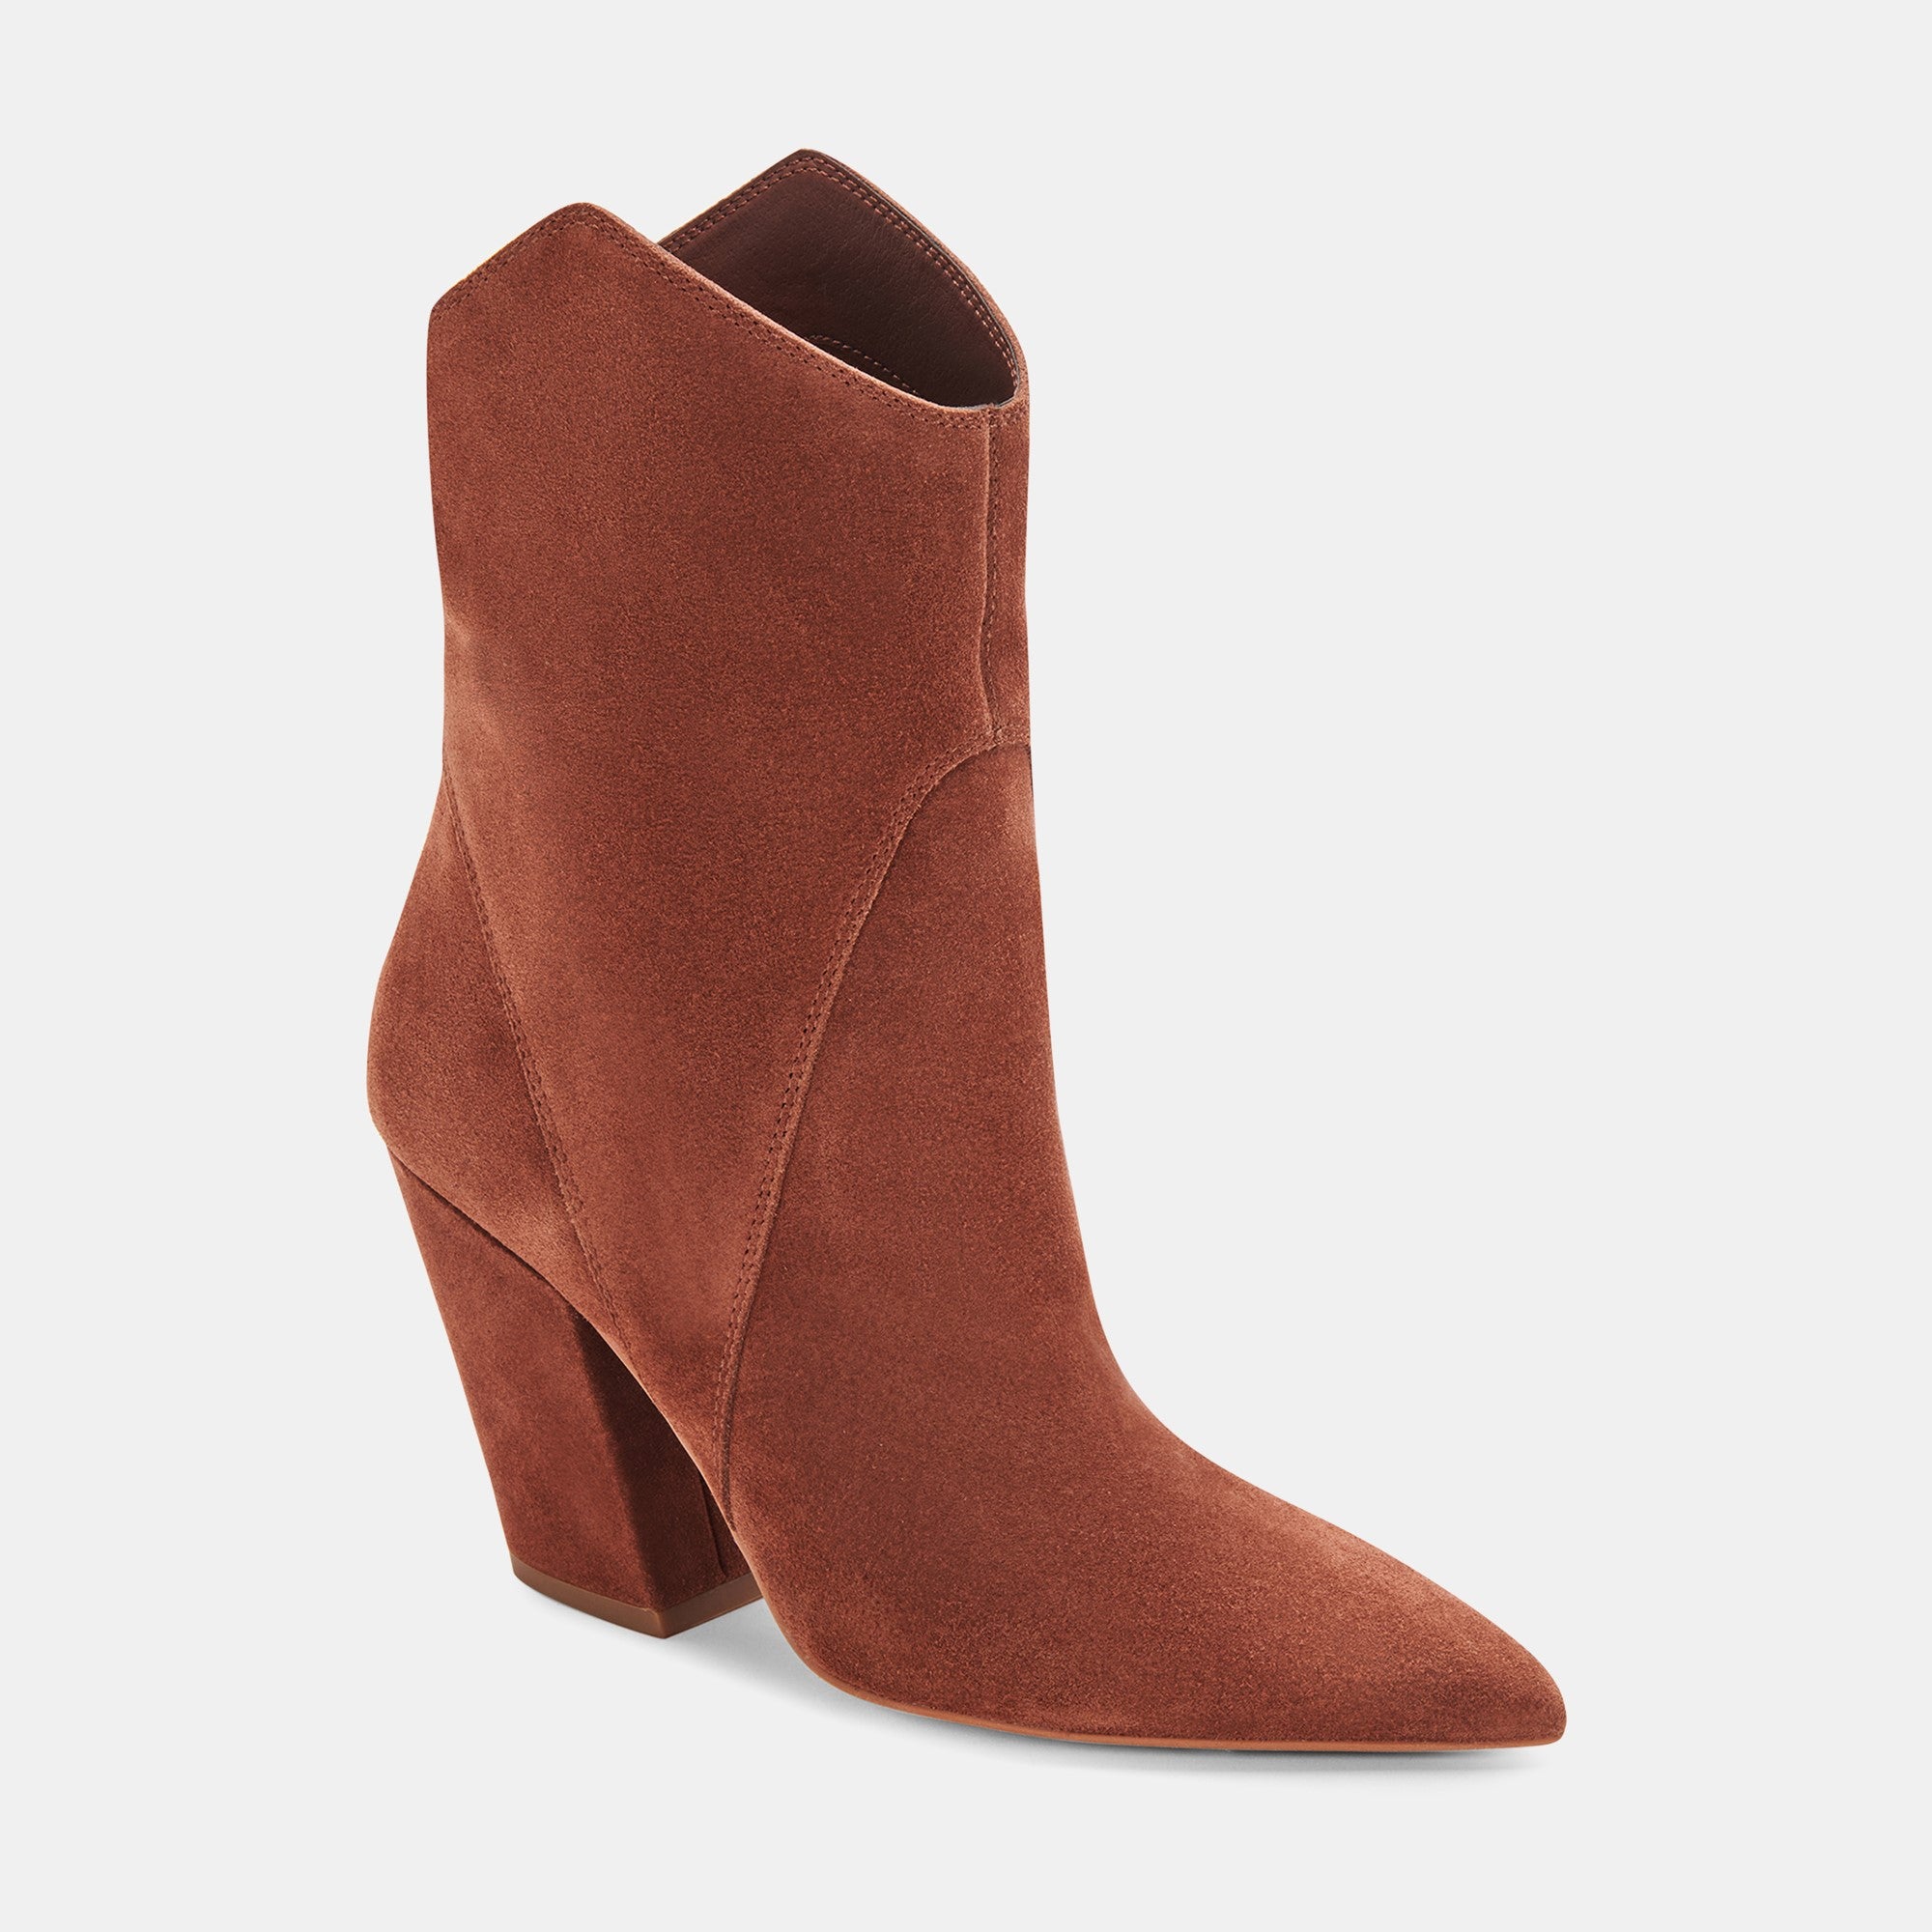 NESTLY BROWN SUEDE